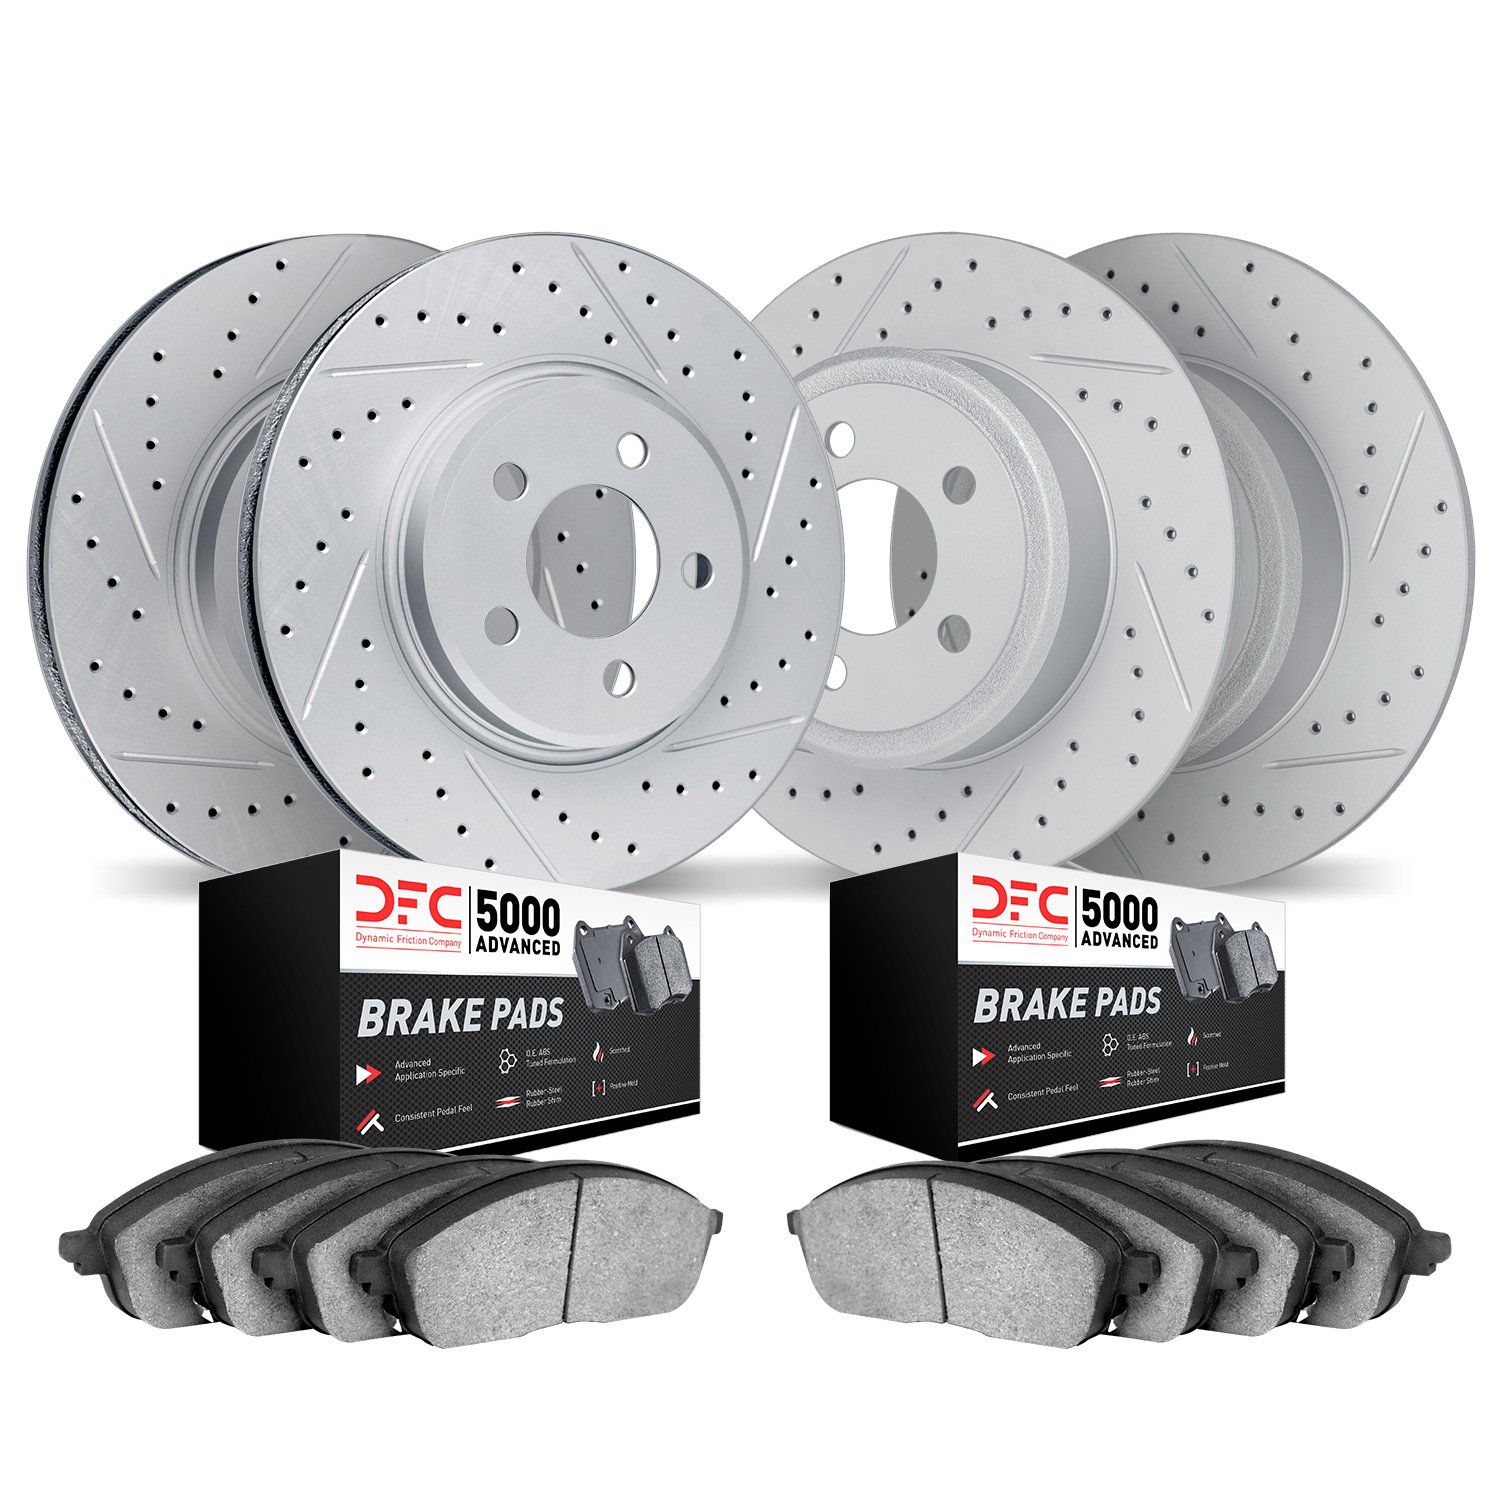 2504-63003 Geoperformance Drilled/Slotted Rotors w/5000 Advanced Brake Pads Kit, 2003-2009 Mercedes-Benz, Position: Front and Re